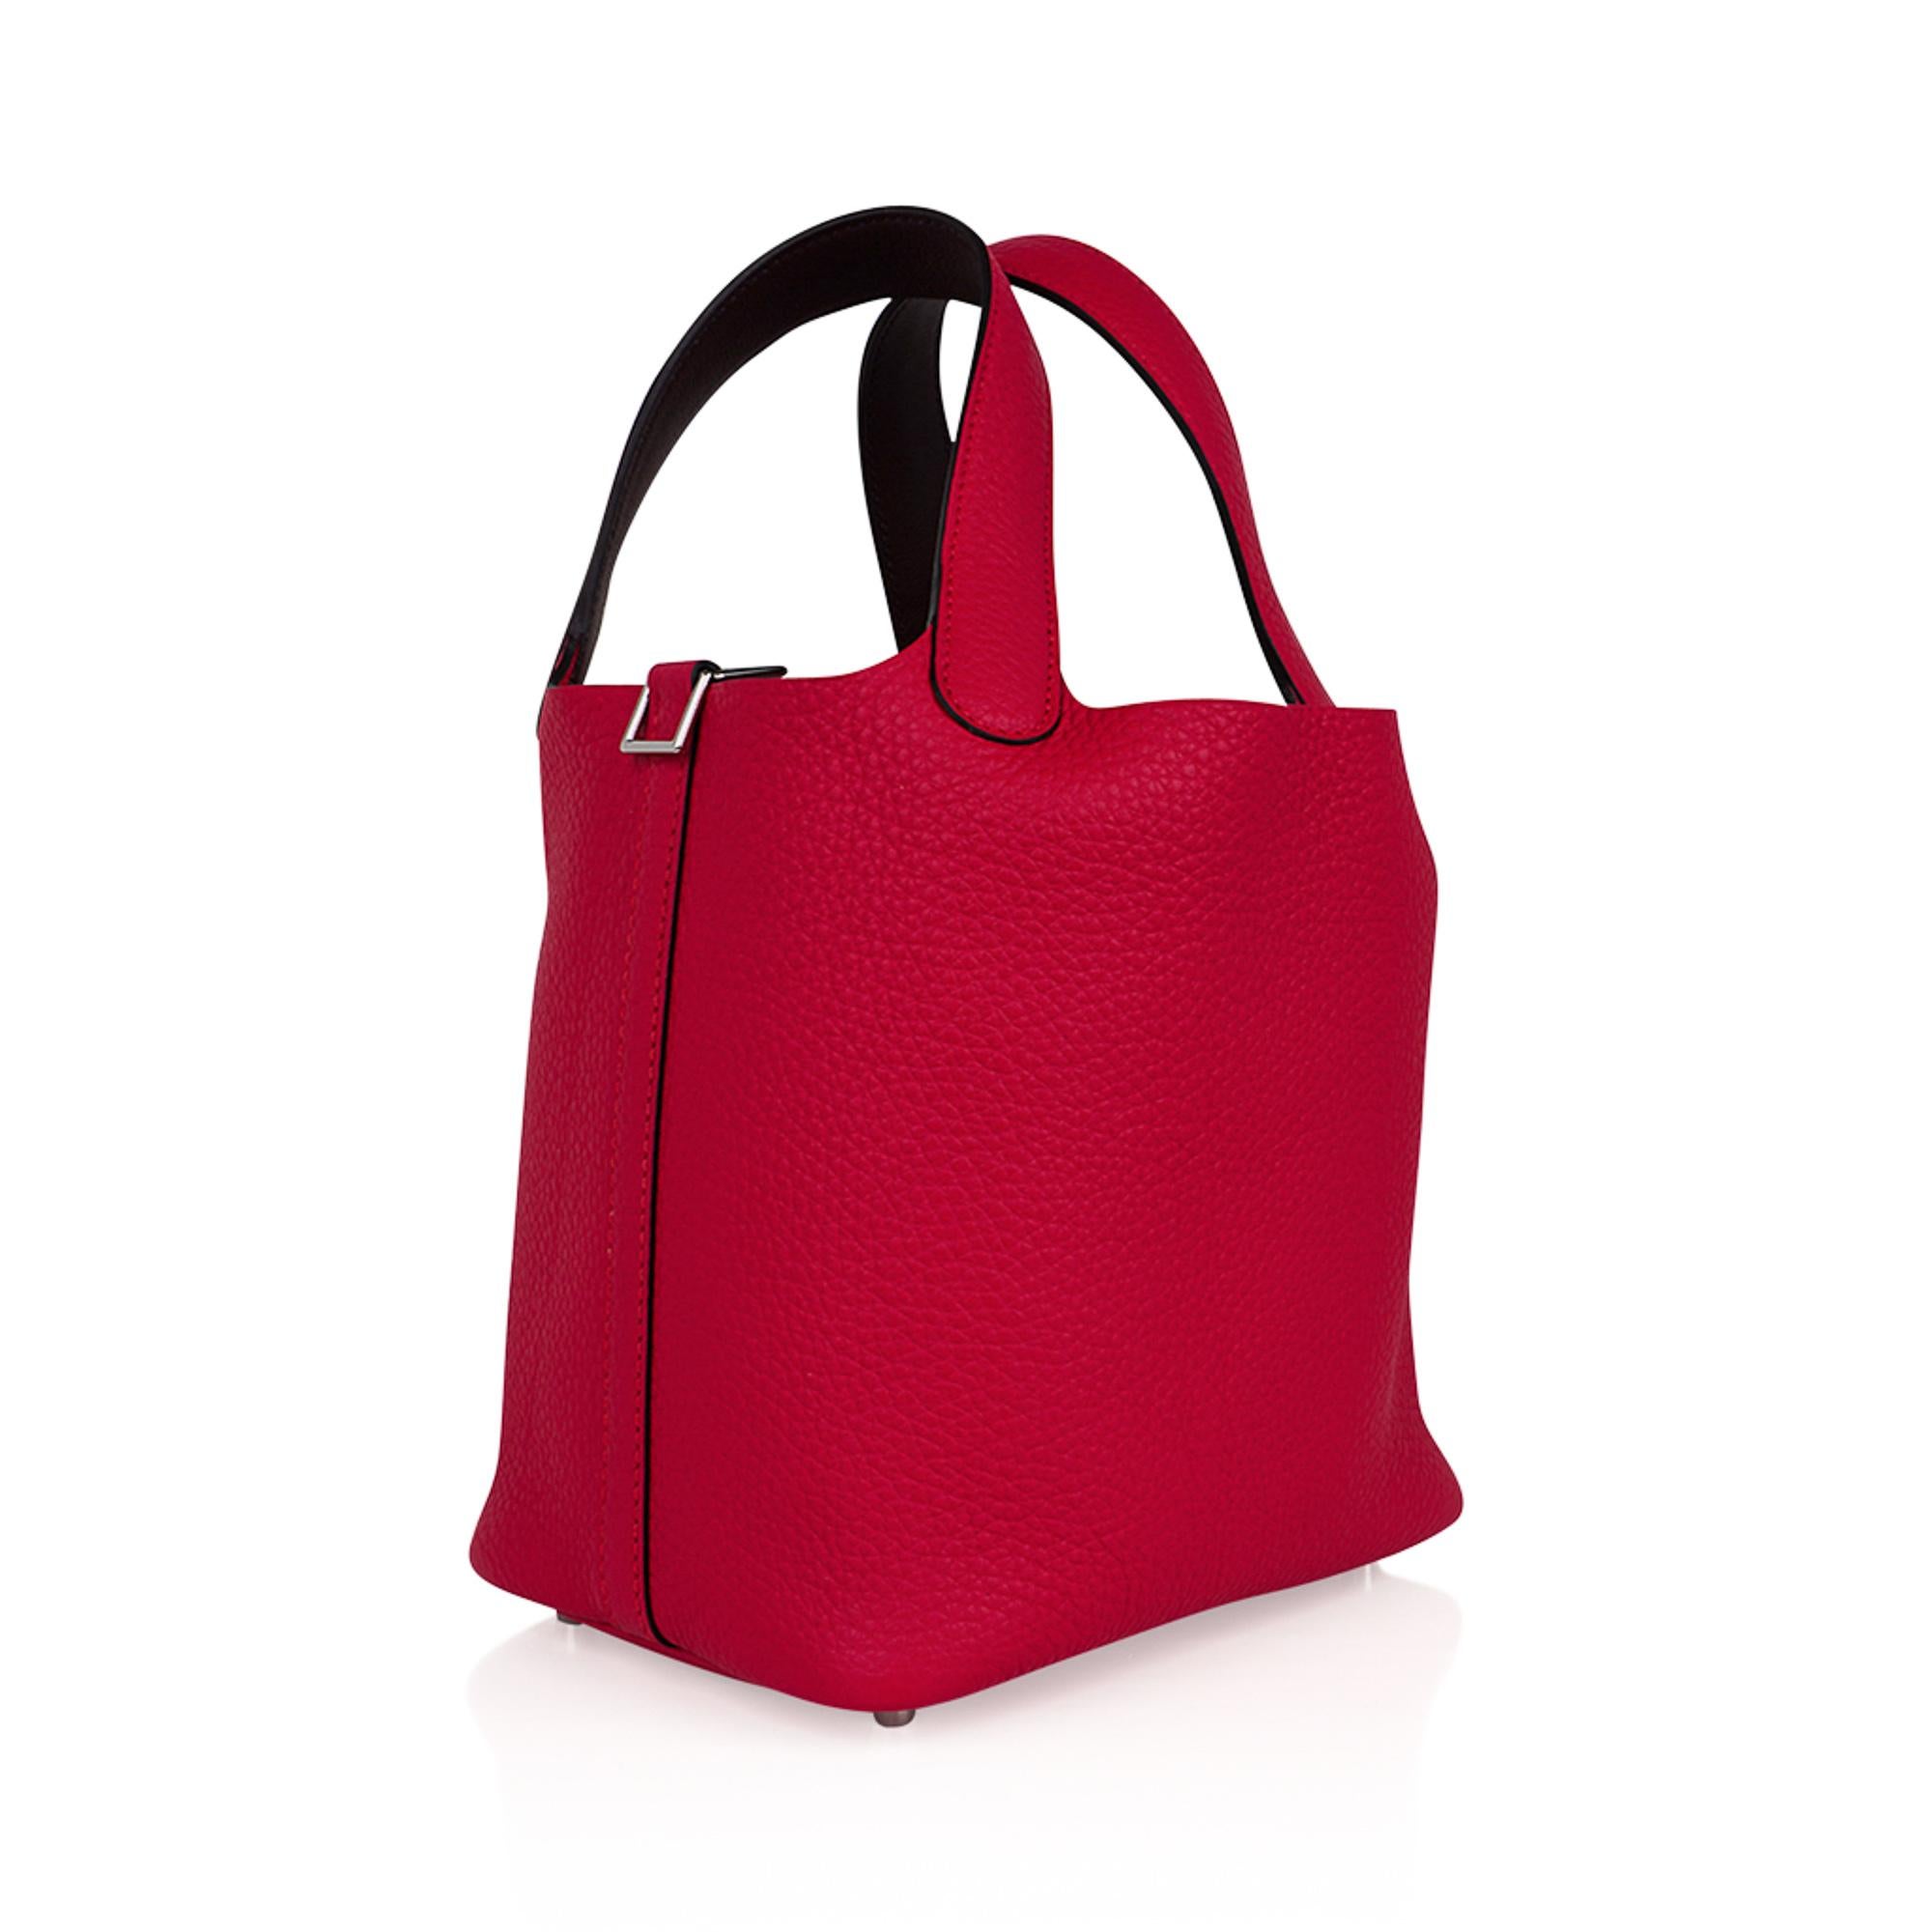 Mightychic offers an Hermes Picotin Eclat Lock 18 tote bag featured in vibrant Framboise.
The interior of the handles are accented in Rouge Sellier.
 Clemence leather with Palladium hardware.
This roomy small tote is a perfect go to bag!
Comes with